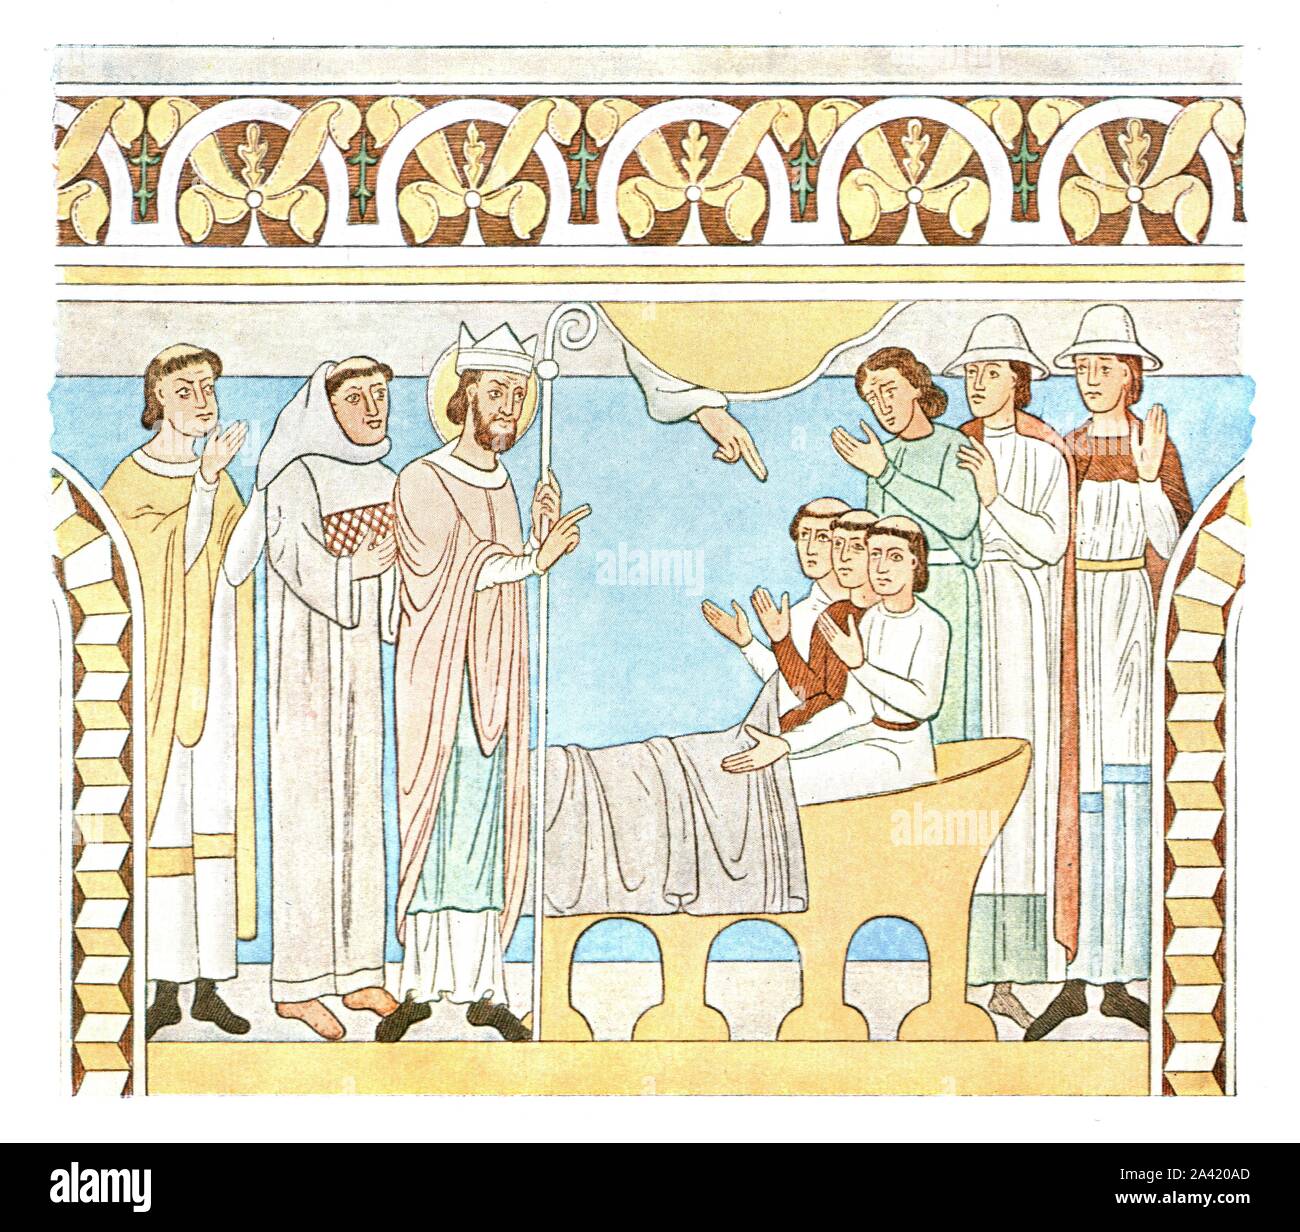 Painting in the nave of Aal Church, Denmark, (1928). '1st Quarter of 13th Century...Aal Church (Amt Ribe). St. Nicholas resuscitates three murdered youths'. After J. Magnus-Petersen. Plate LIX, fig 130, from &quot;An Encyclopaedia of Colour Decoration from the Earliest Times to the Middle of the XIXth Century&quot; with explanatory text by Helmuth Bossert. [Ernst Wasmuth Ltd., Berlin, 1928] Stock Photo